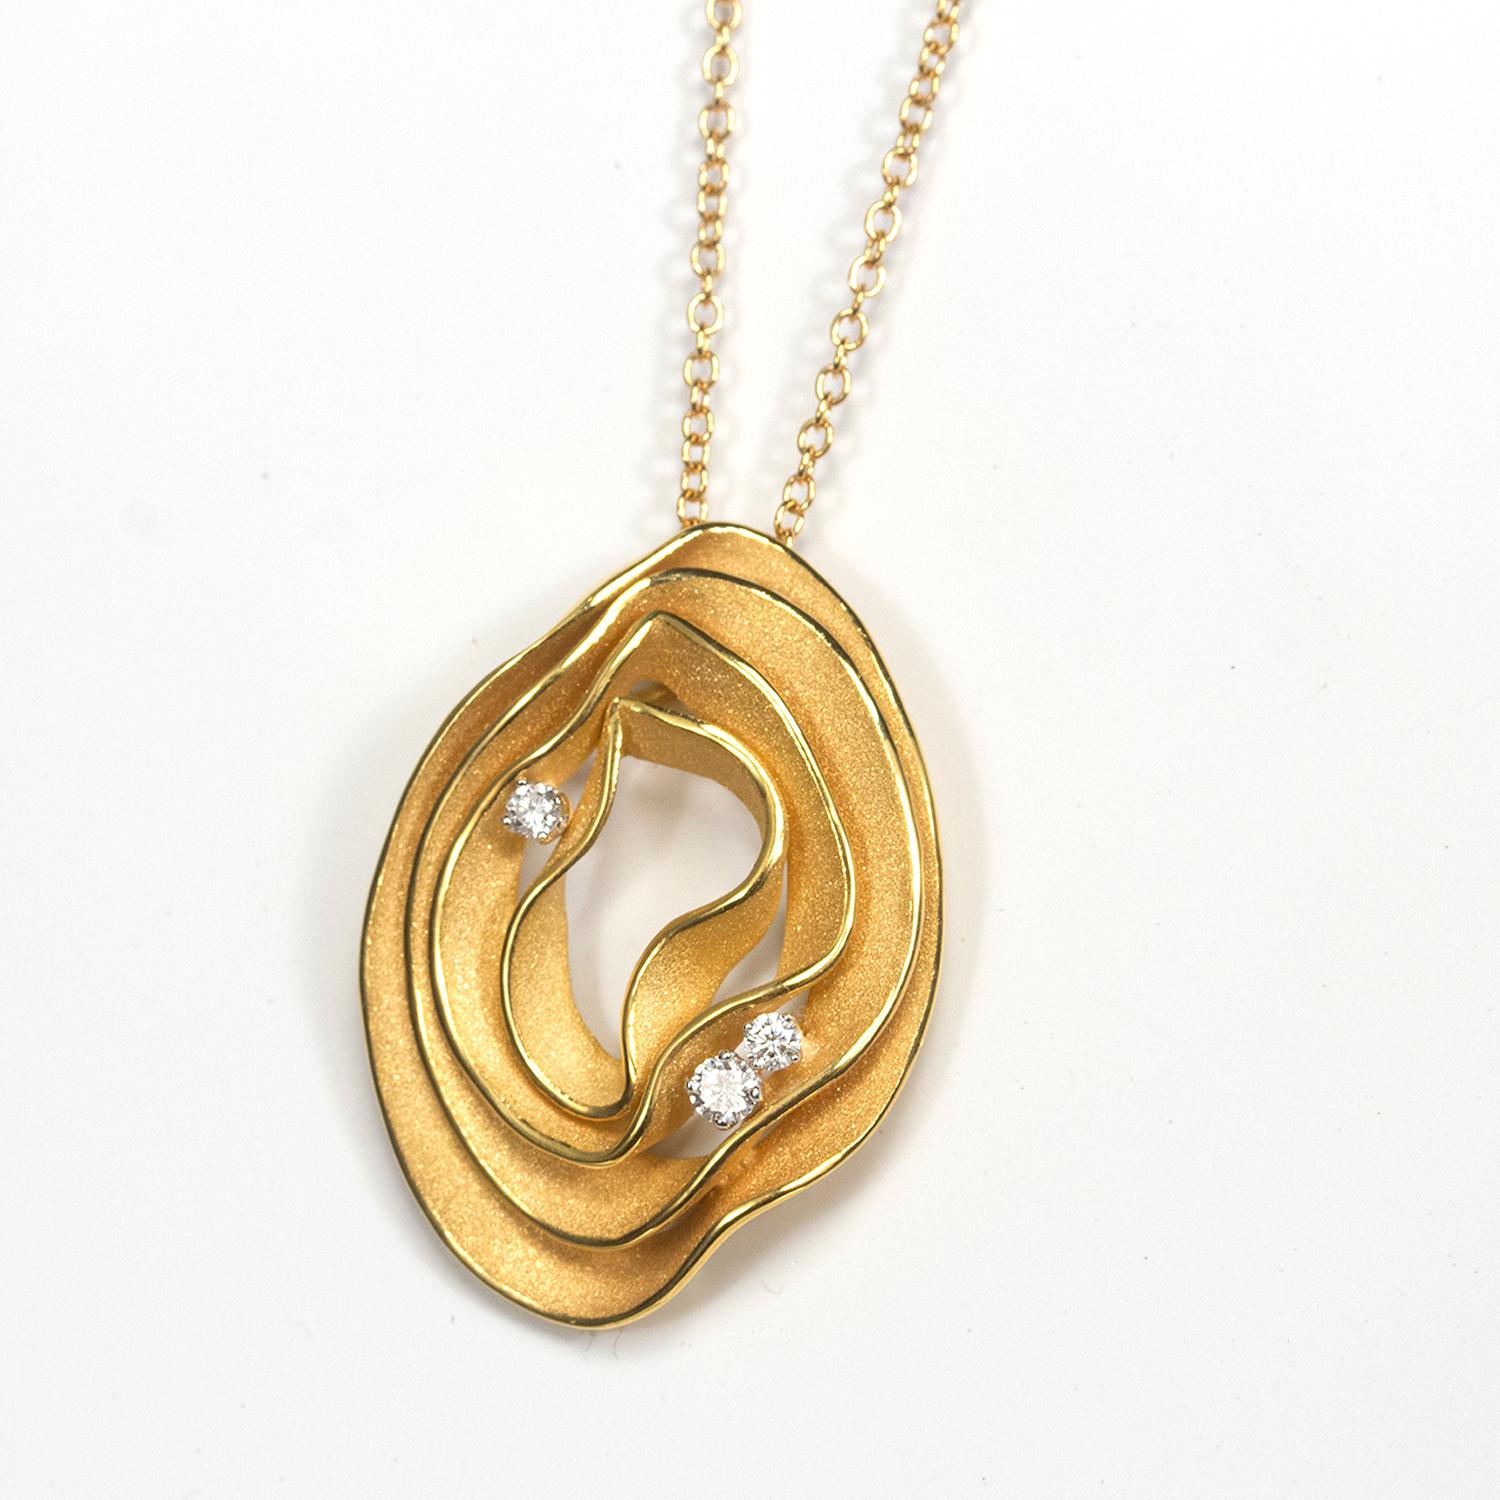 From Annamaria Cammilli's Dune Electa collection, pendant necklace handcrafted in 18 karat Apricot Orange gold. Four layers of polished and satin textured gold, with three diamonds nested between layers. Diamond total weight is 0.16 carat. Pendant